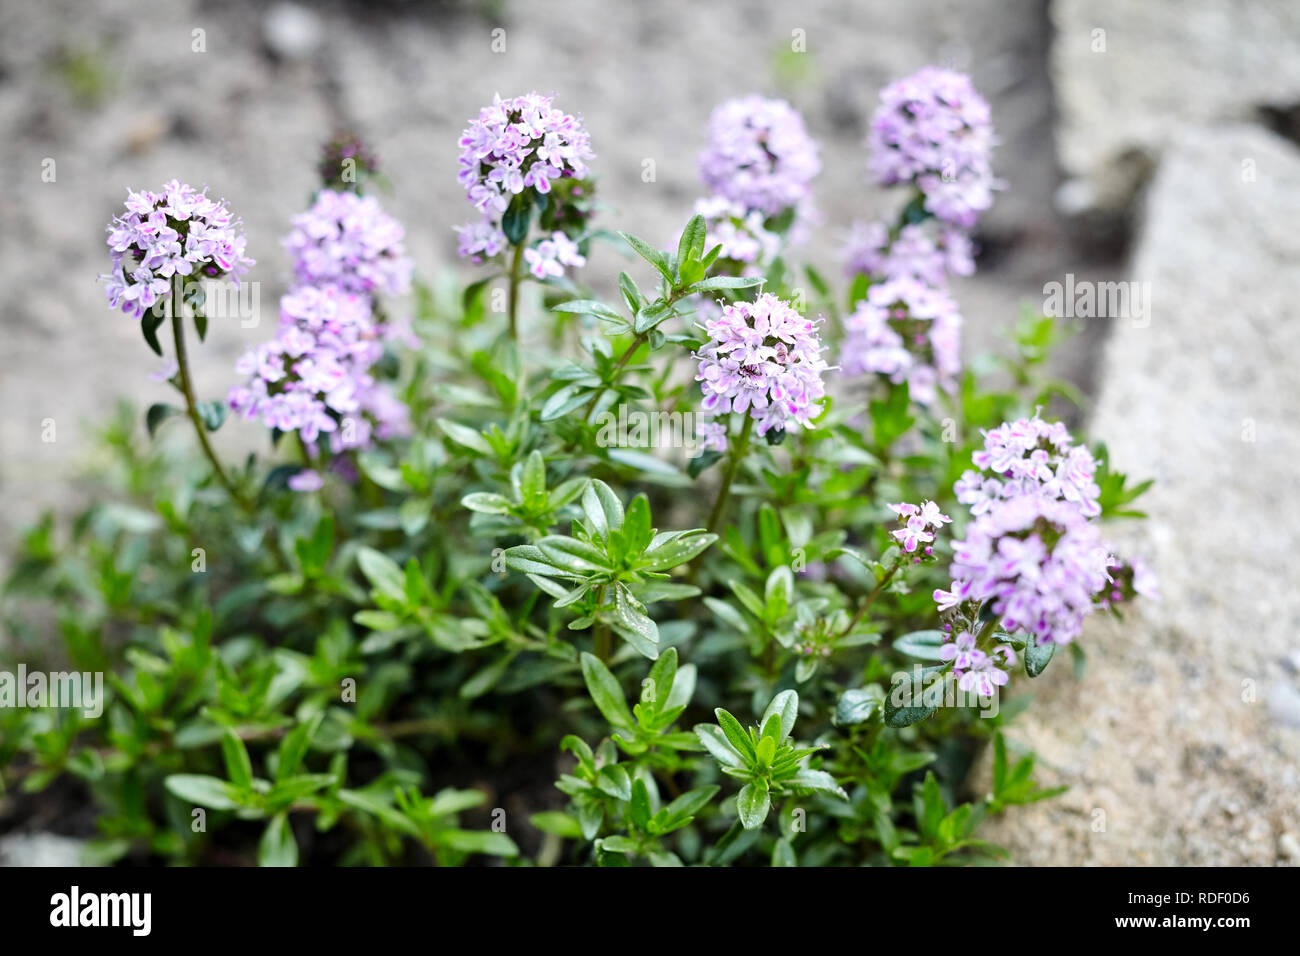 Flowering thyme bush with purple flowers growing outdoors in a garden, an aromatic herb with culinary and medicinal uses Stock Photo